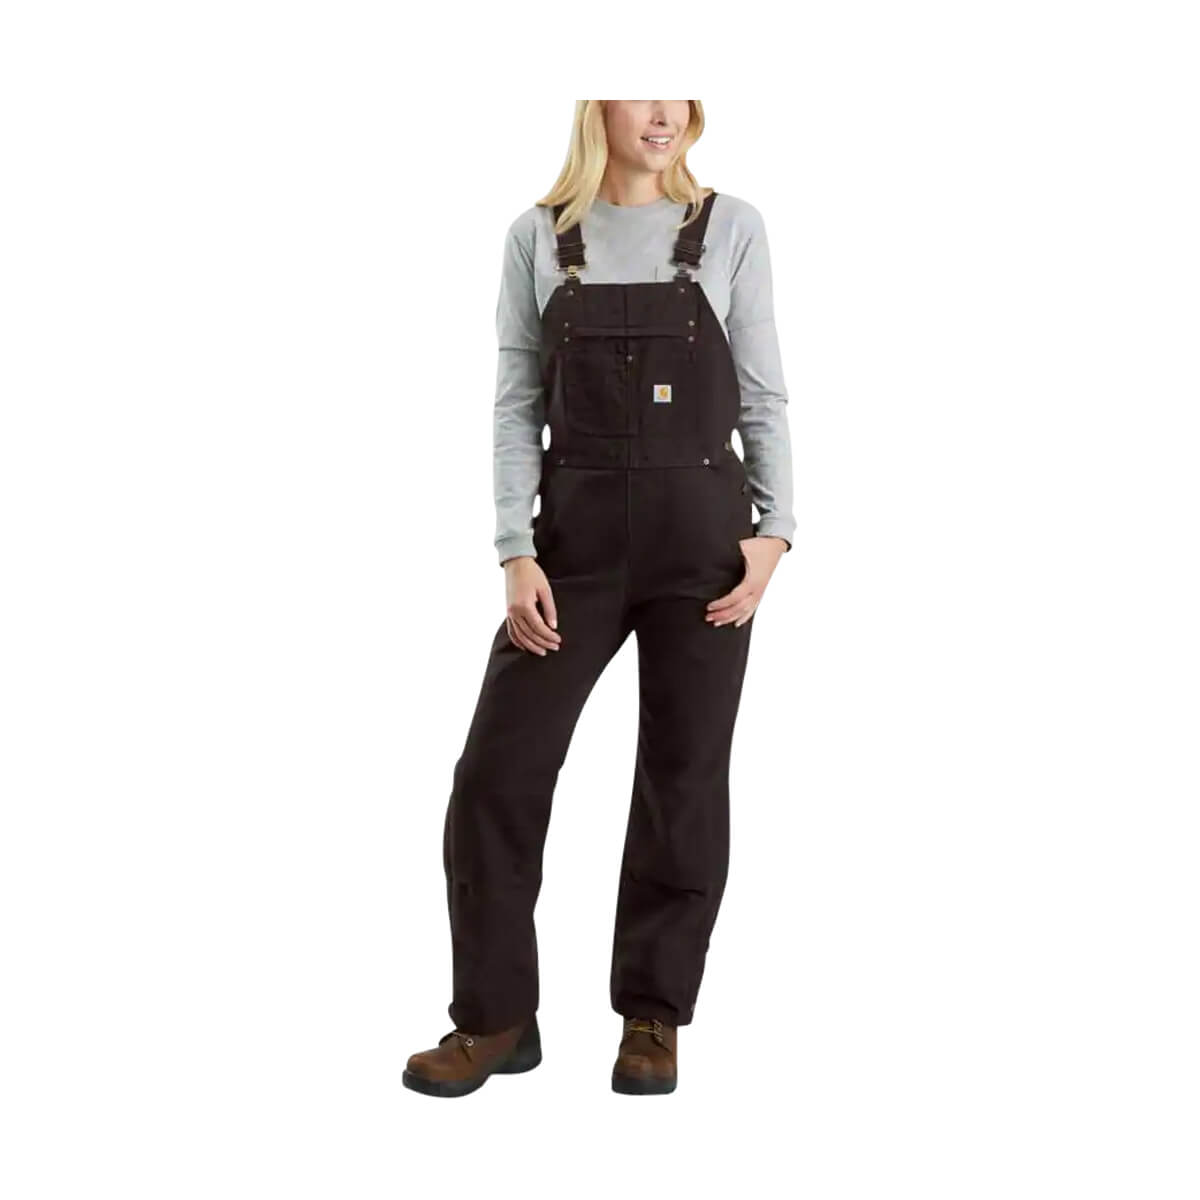 Women's Relaxed Fit Washed Duck Insulated Bib Overall - Dark Brown